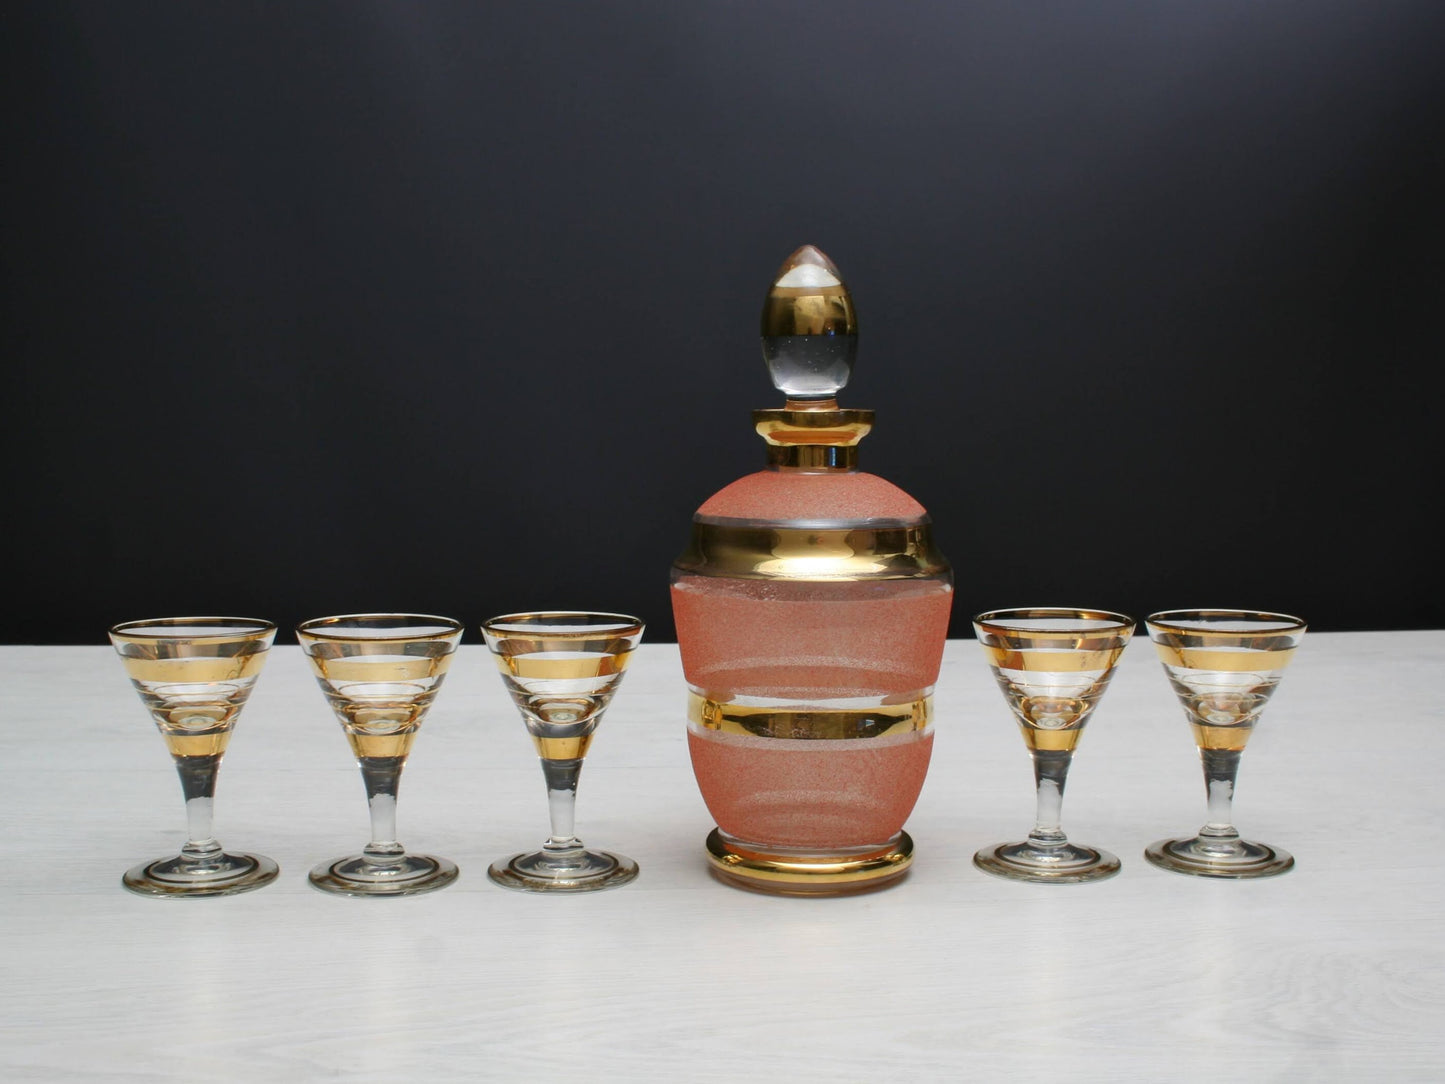 Vintage Decanter Set | Whiskey Decanter Deals, Gifts for Men and Gifts For Women